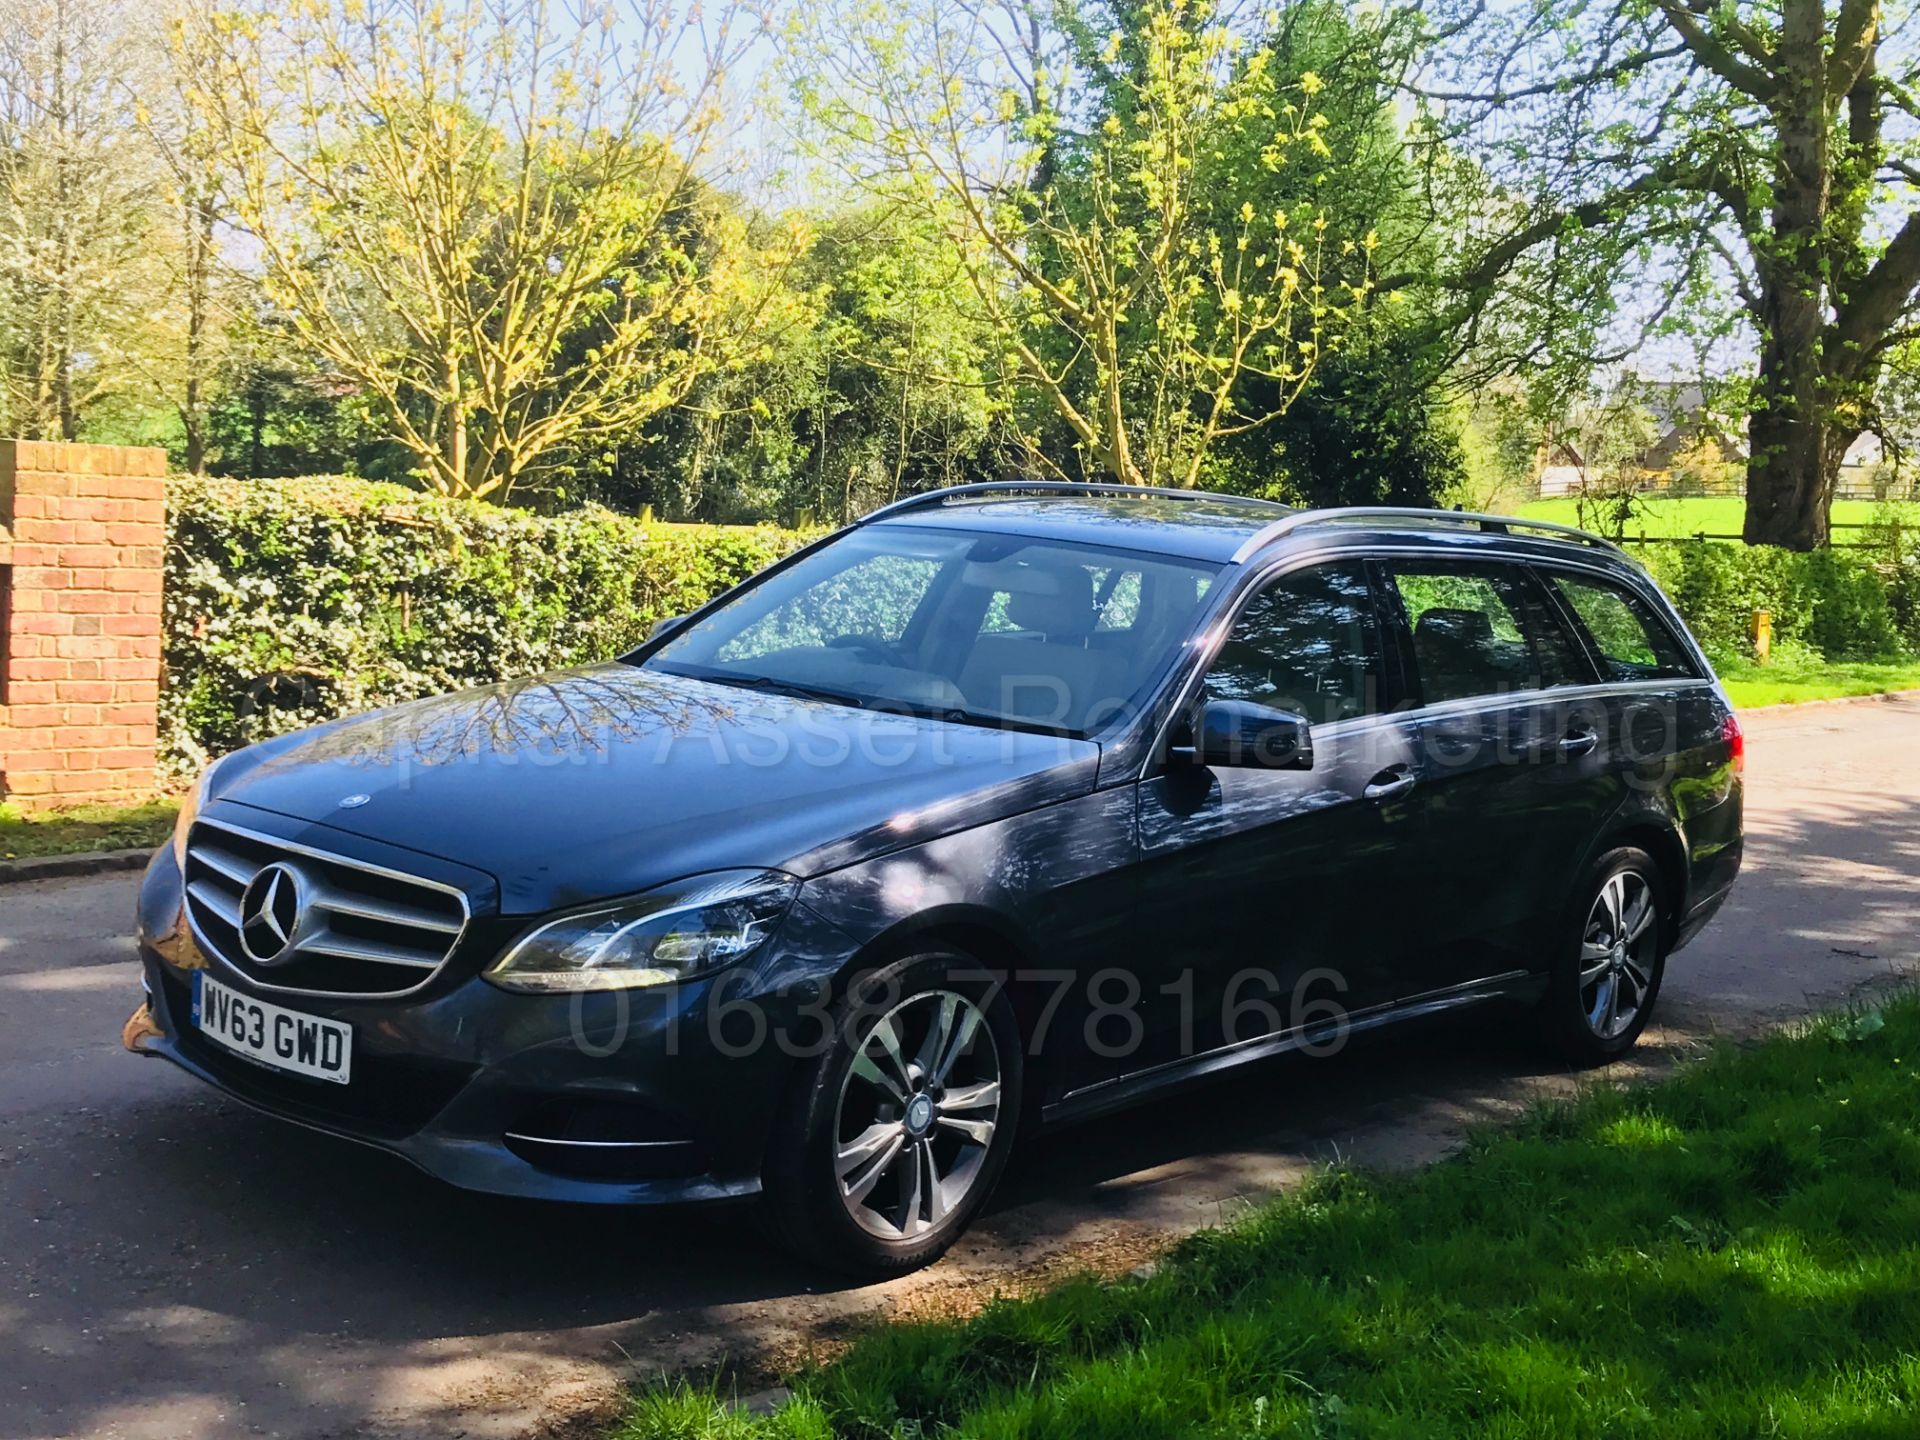 MERCEDES E220CDI "SPECIAL EQUIPMENT" ESTATE 7G TRONIC (2014 YEAR) SAT NAV - LEATHER - COMAND - Image 5 of 35